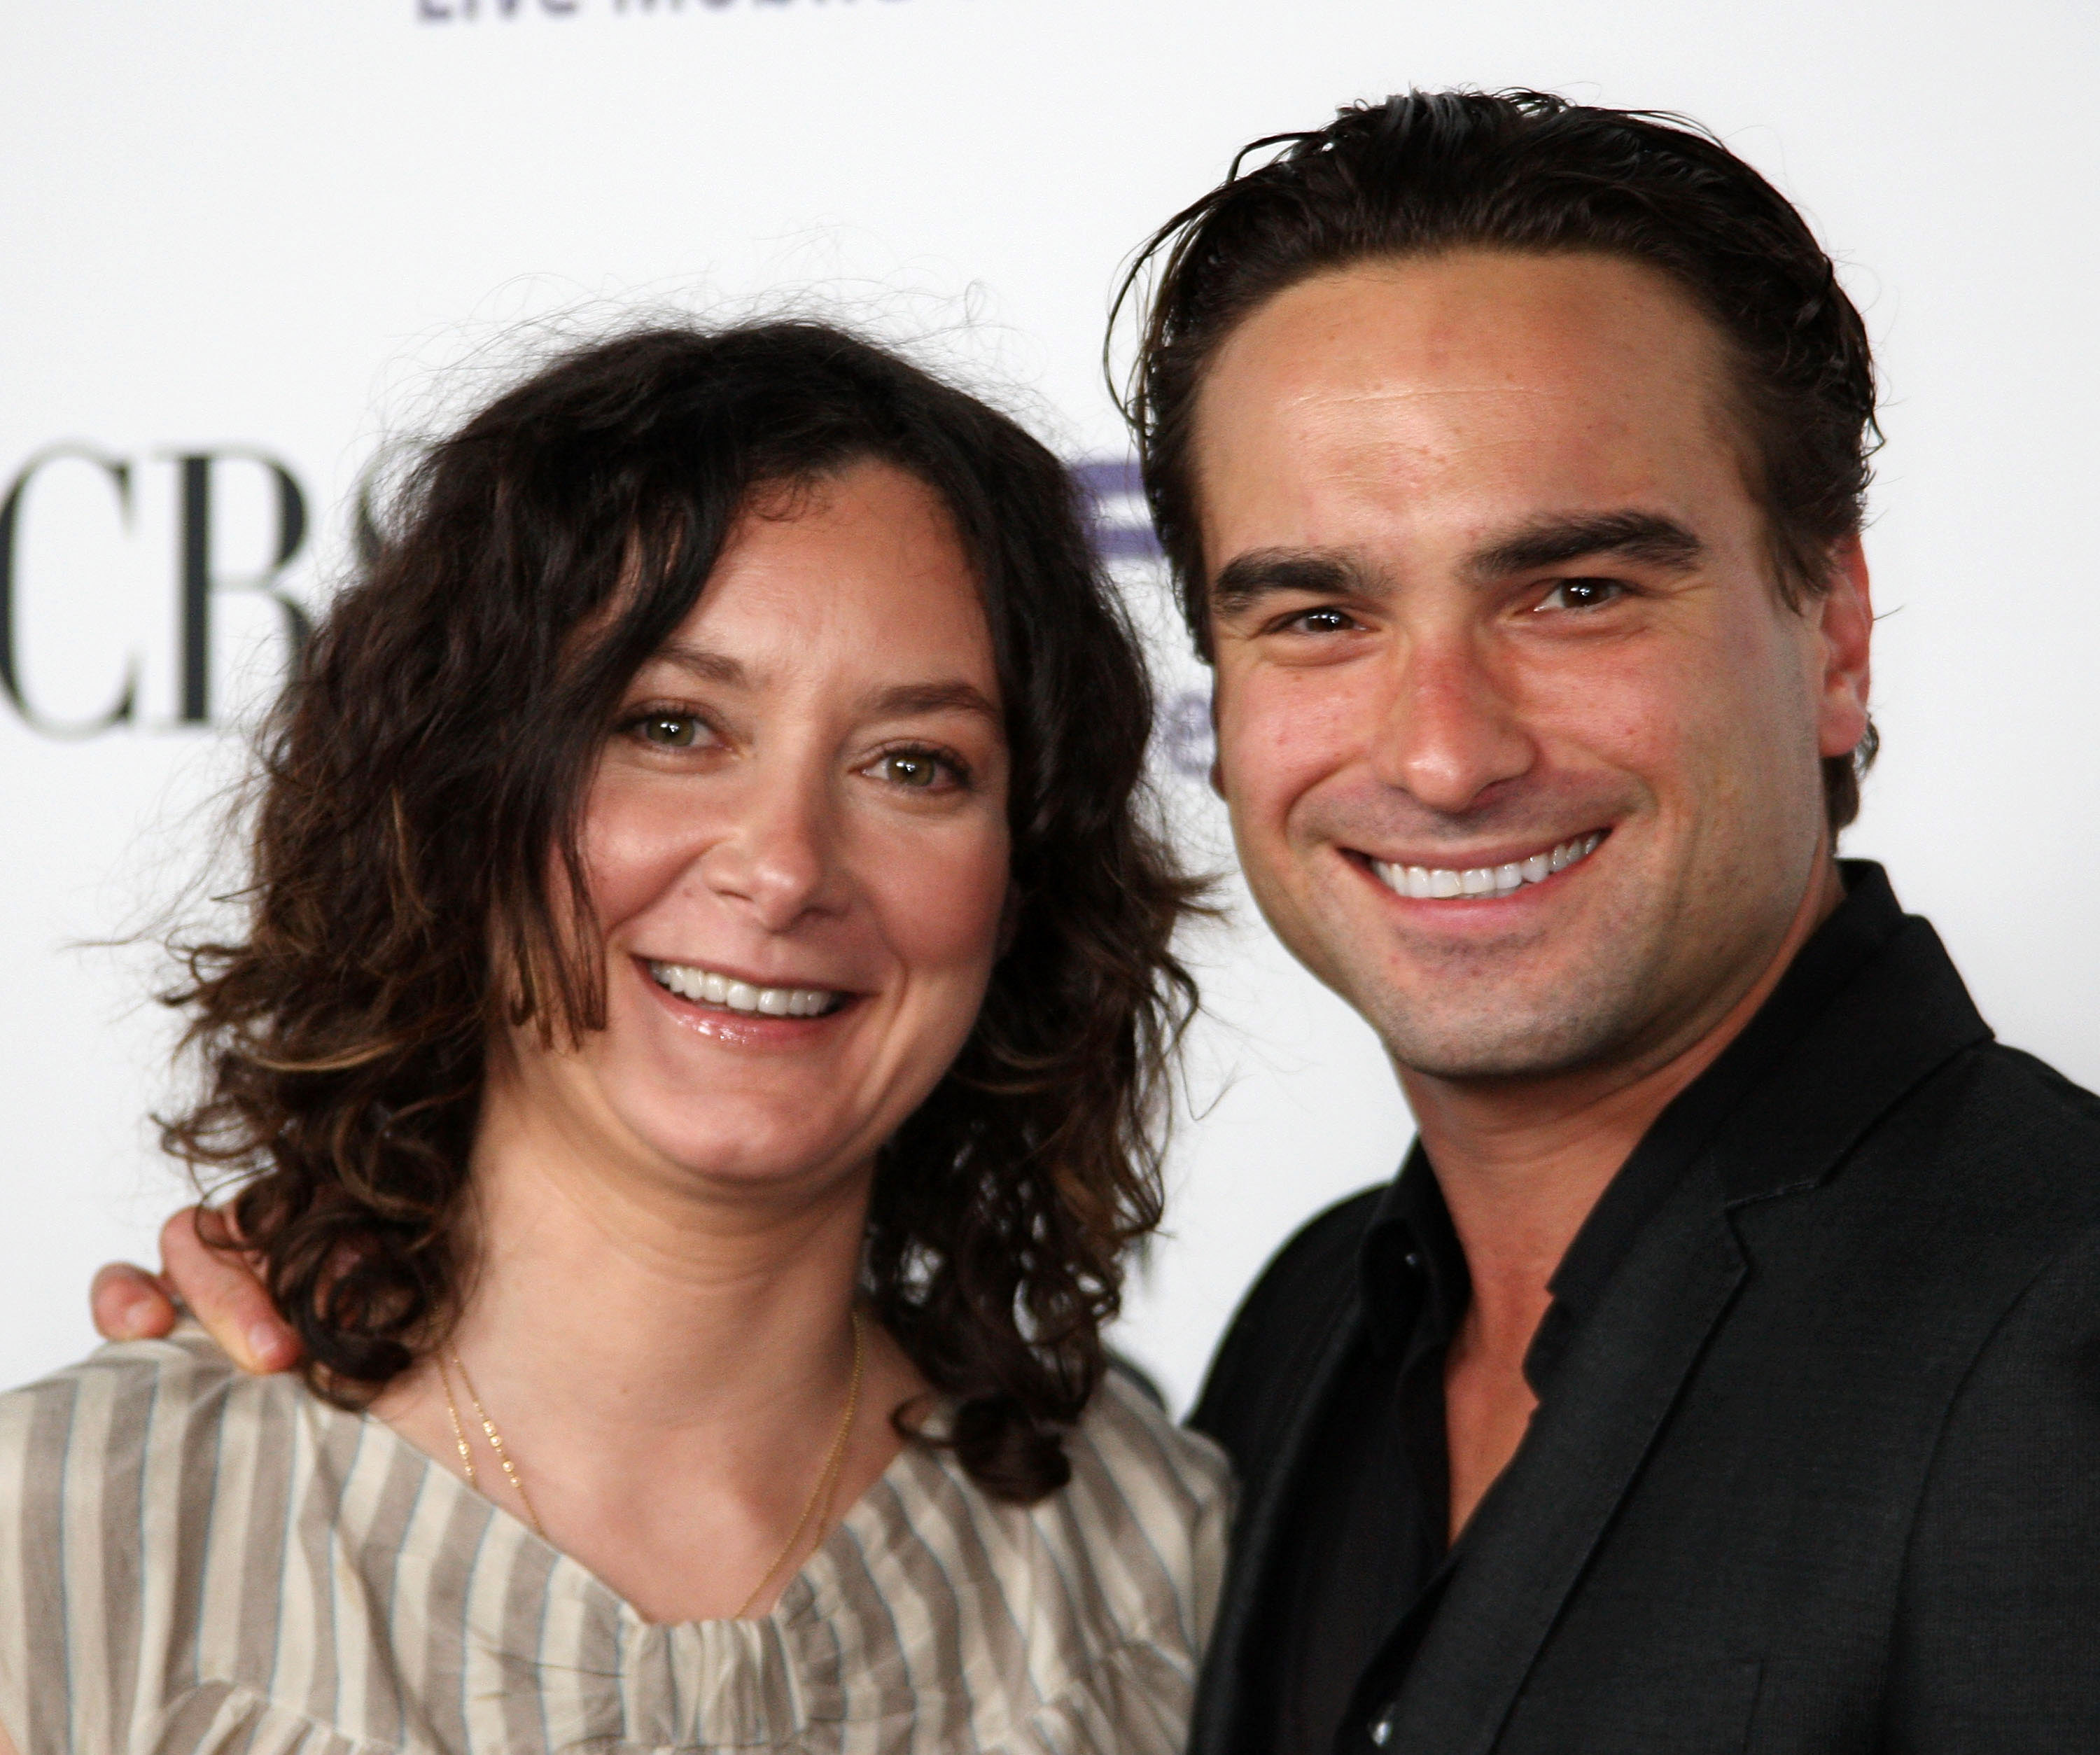 Actors Sara Gilbert (L) and Johnny Galecki attend the CBS Comedies' Season Premiere Party at Area September 17, 2008 in Los Angeles, California | Source: Getty Images